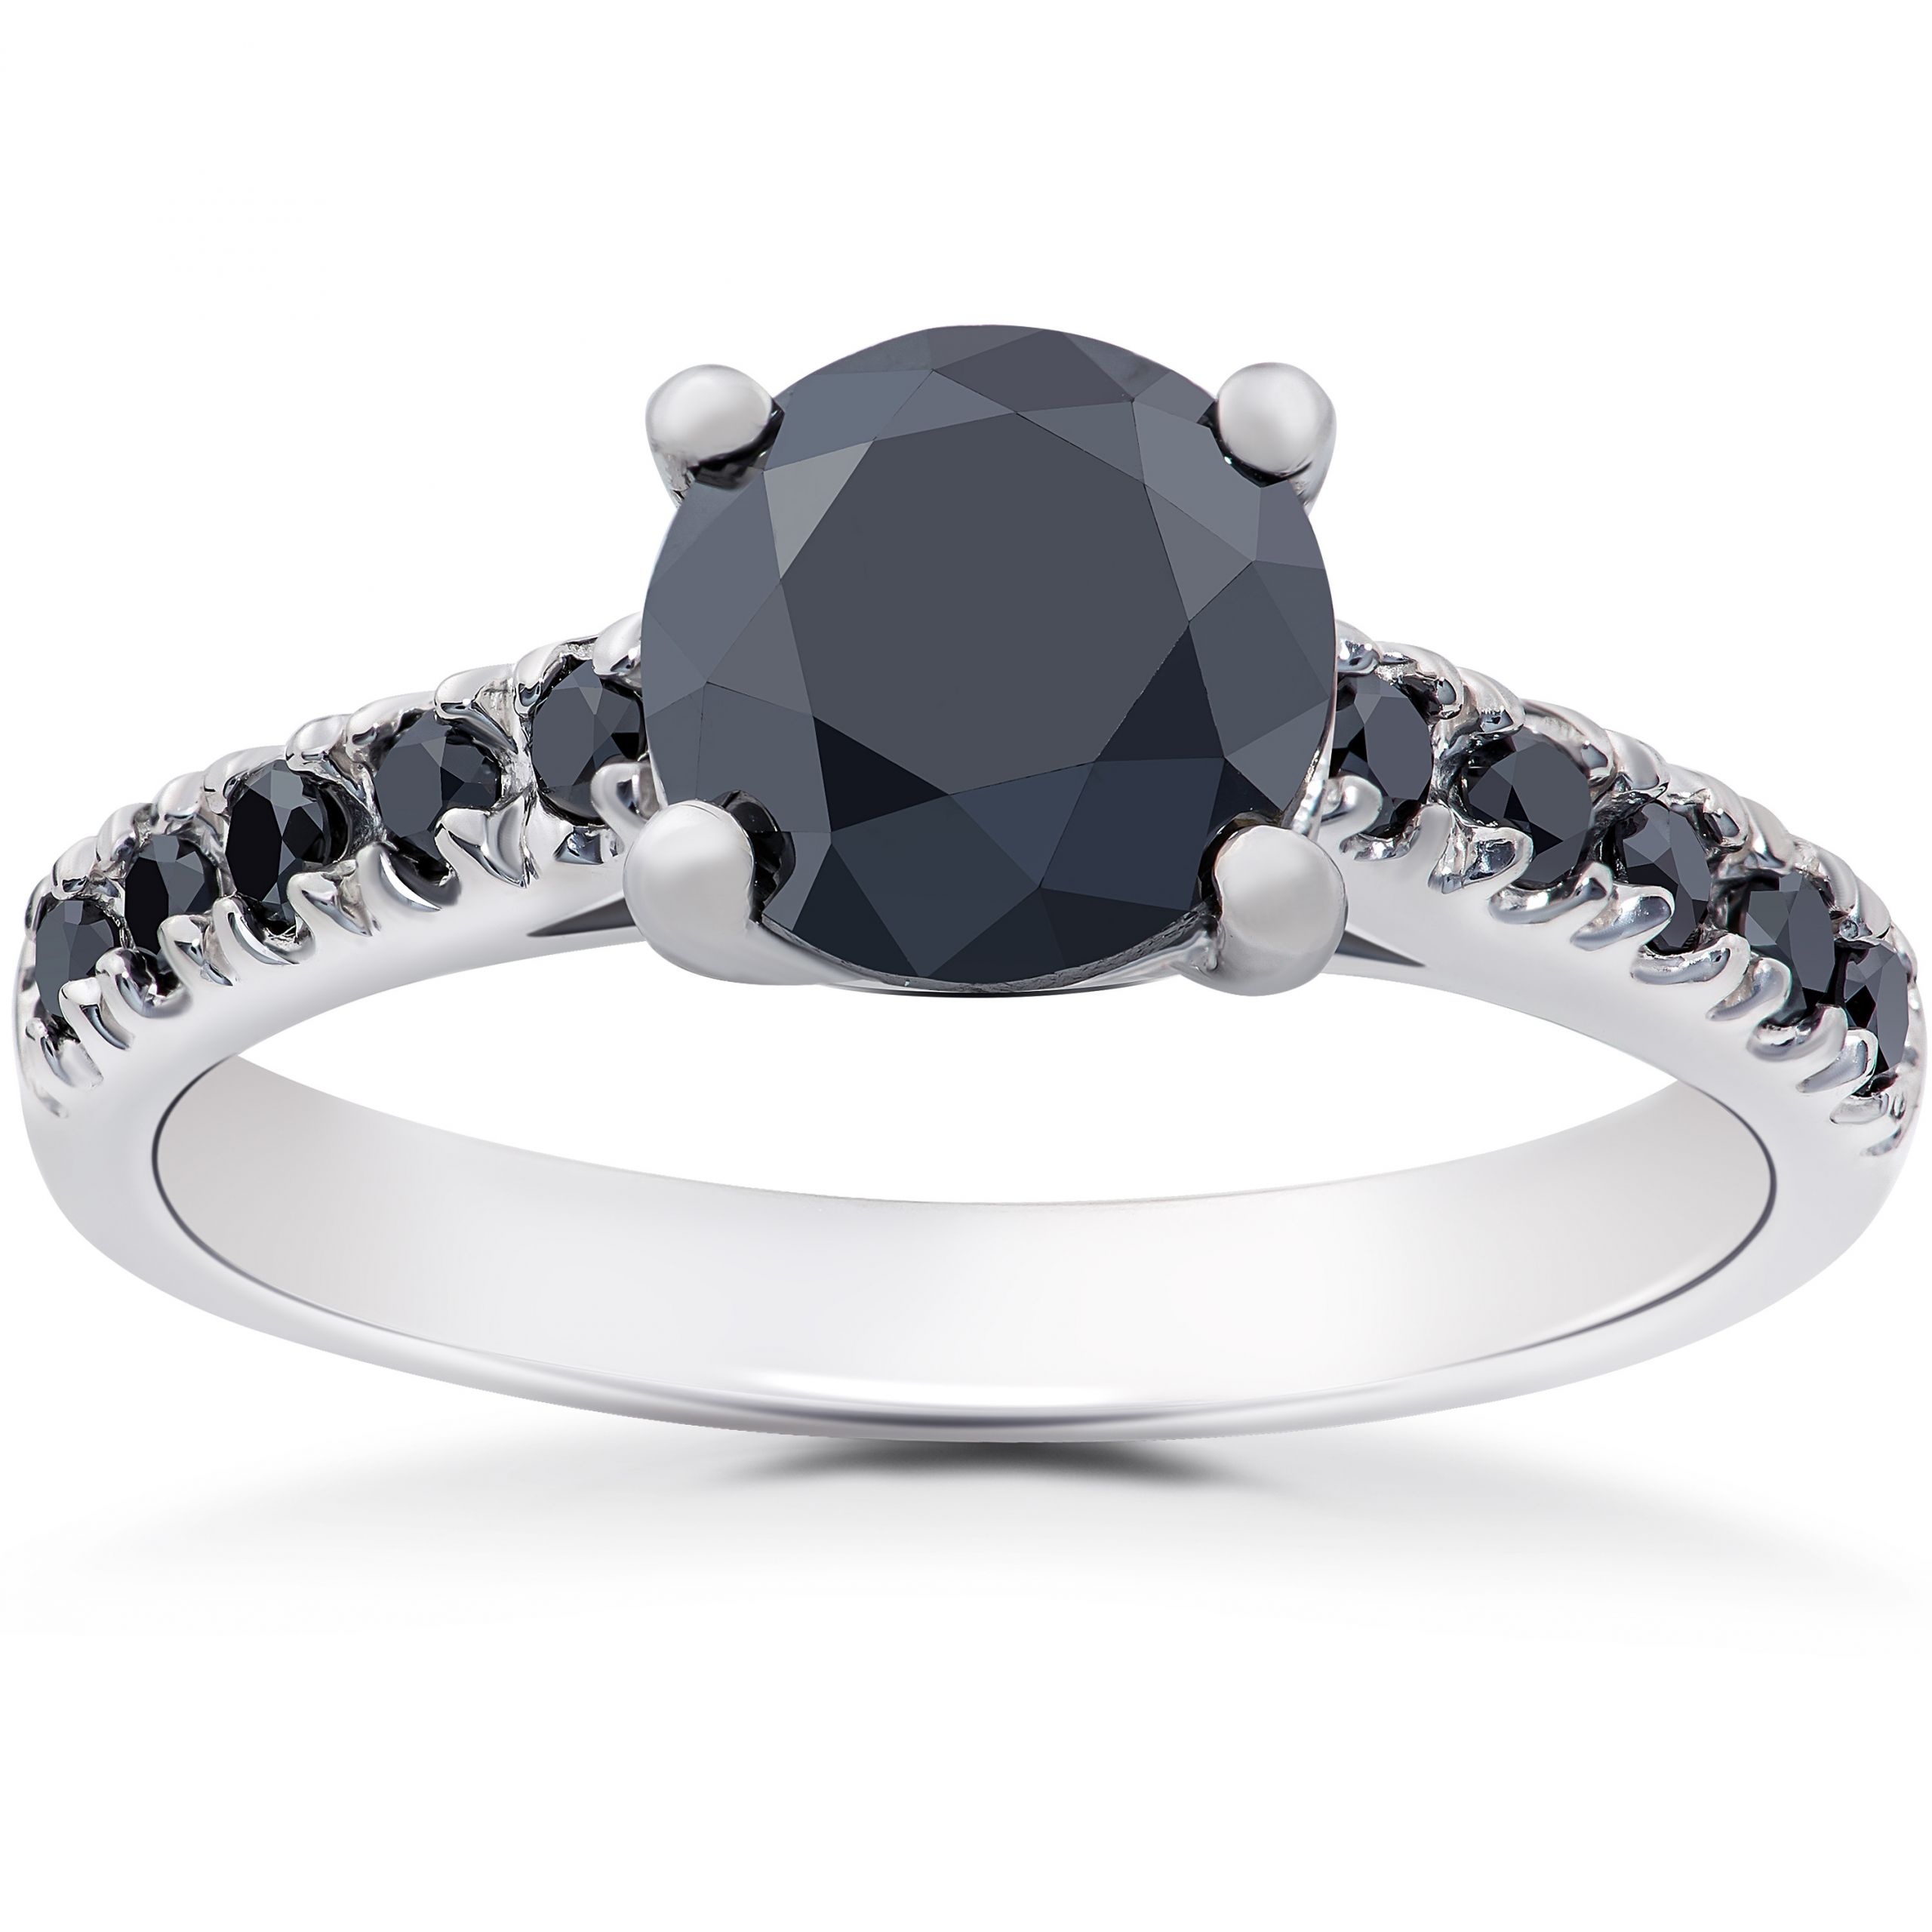 Engagement Rings With Black Diamond Accents
 2 1 4 ct Black Diamond Solitaire Accent Engagement Ring